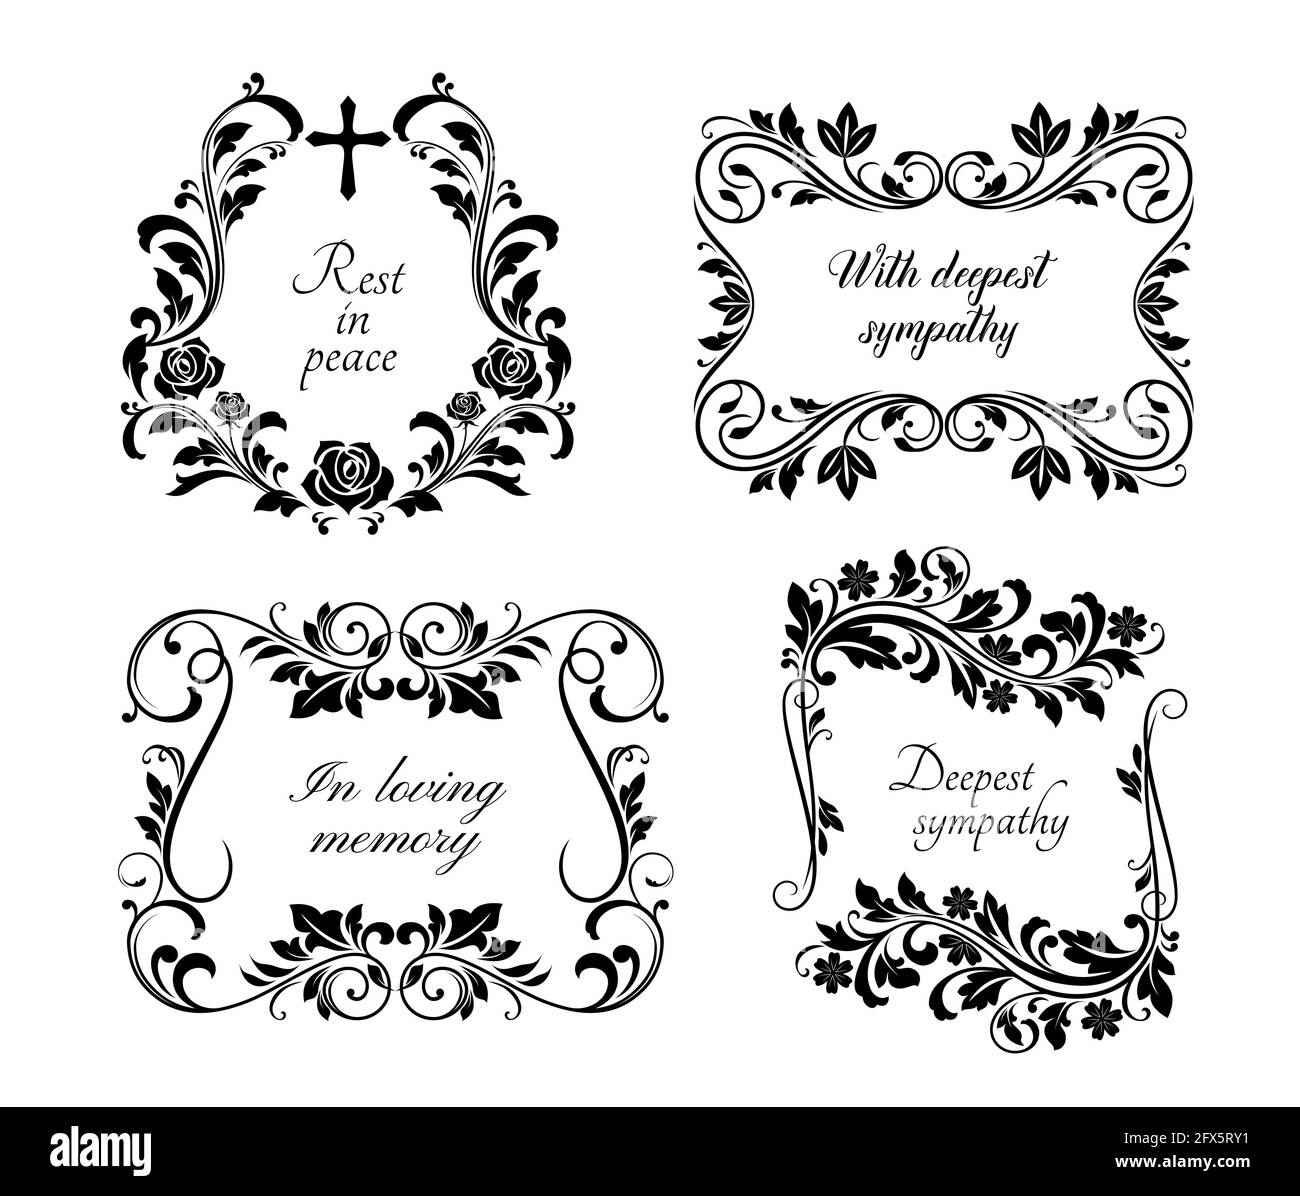 Funeral frames, memorial cards with floral borders, rest in peace, in loving memory and deepest sympathy condolences. Obituary and tombstone decoratio Stock Vector